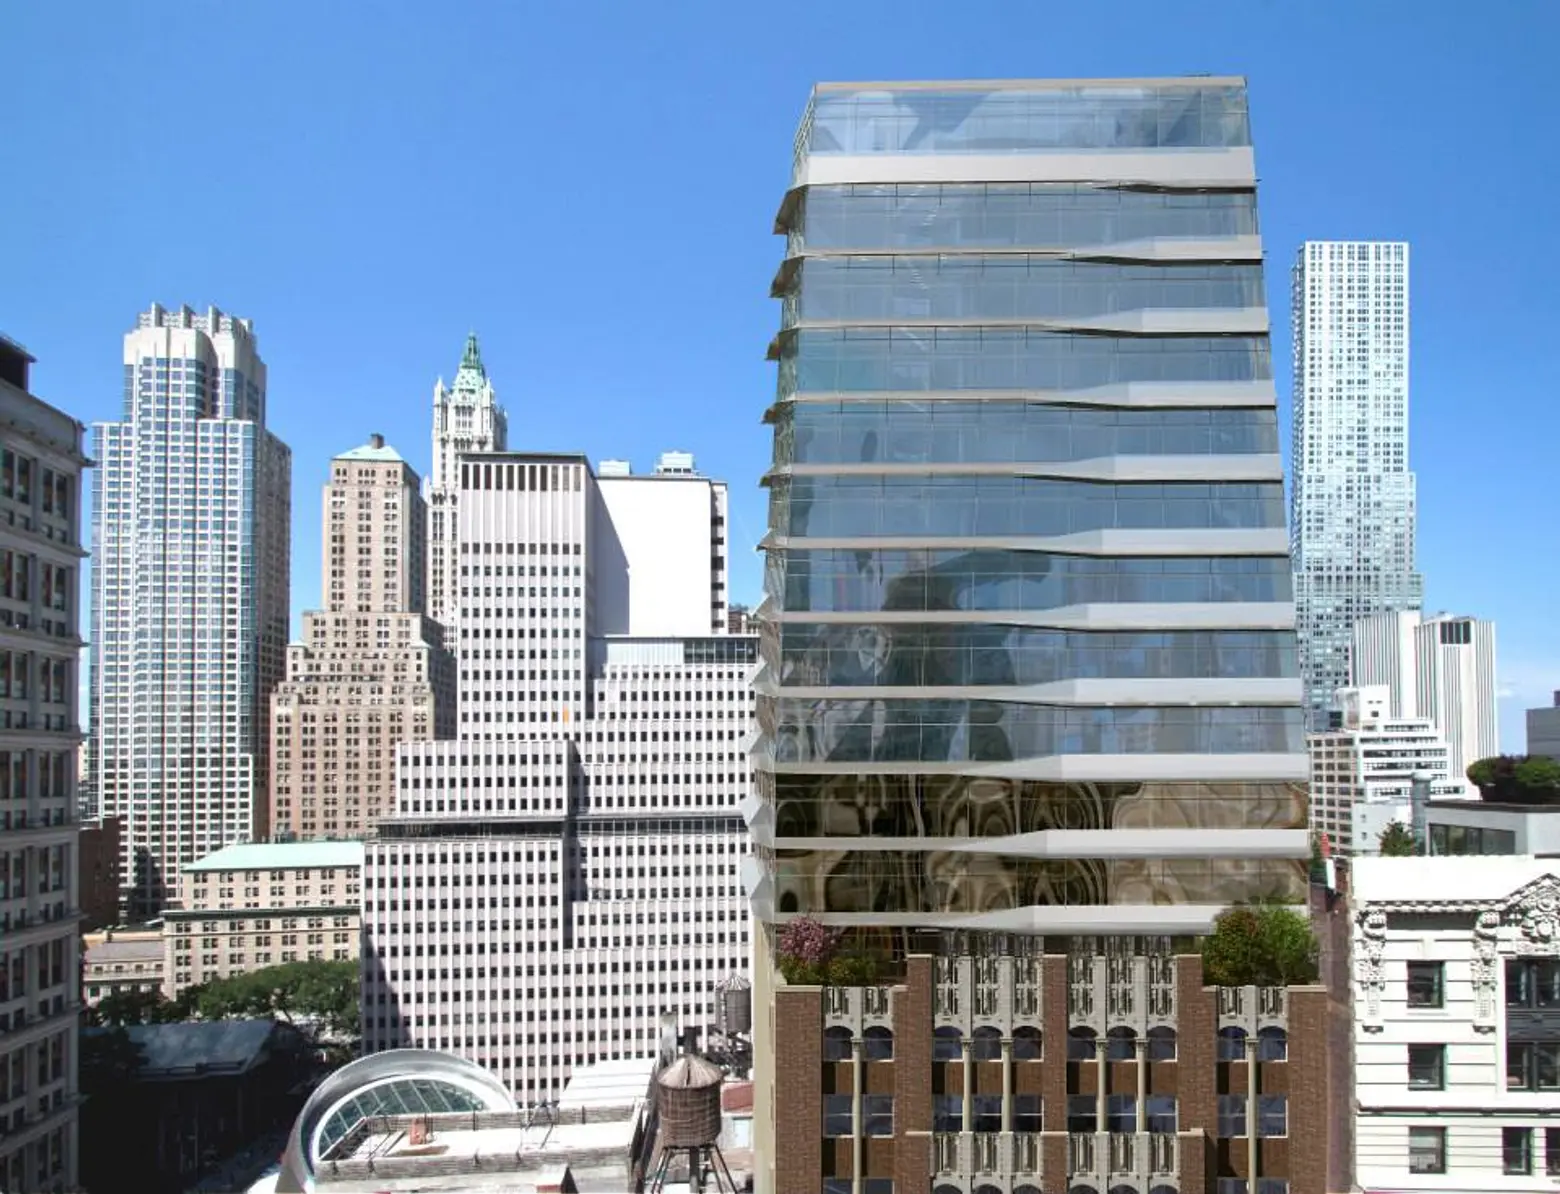 Prodigy Network Closes on $85 Million FiDi Site for Their ‘Cotel’ Crowdfunded Hotel